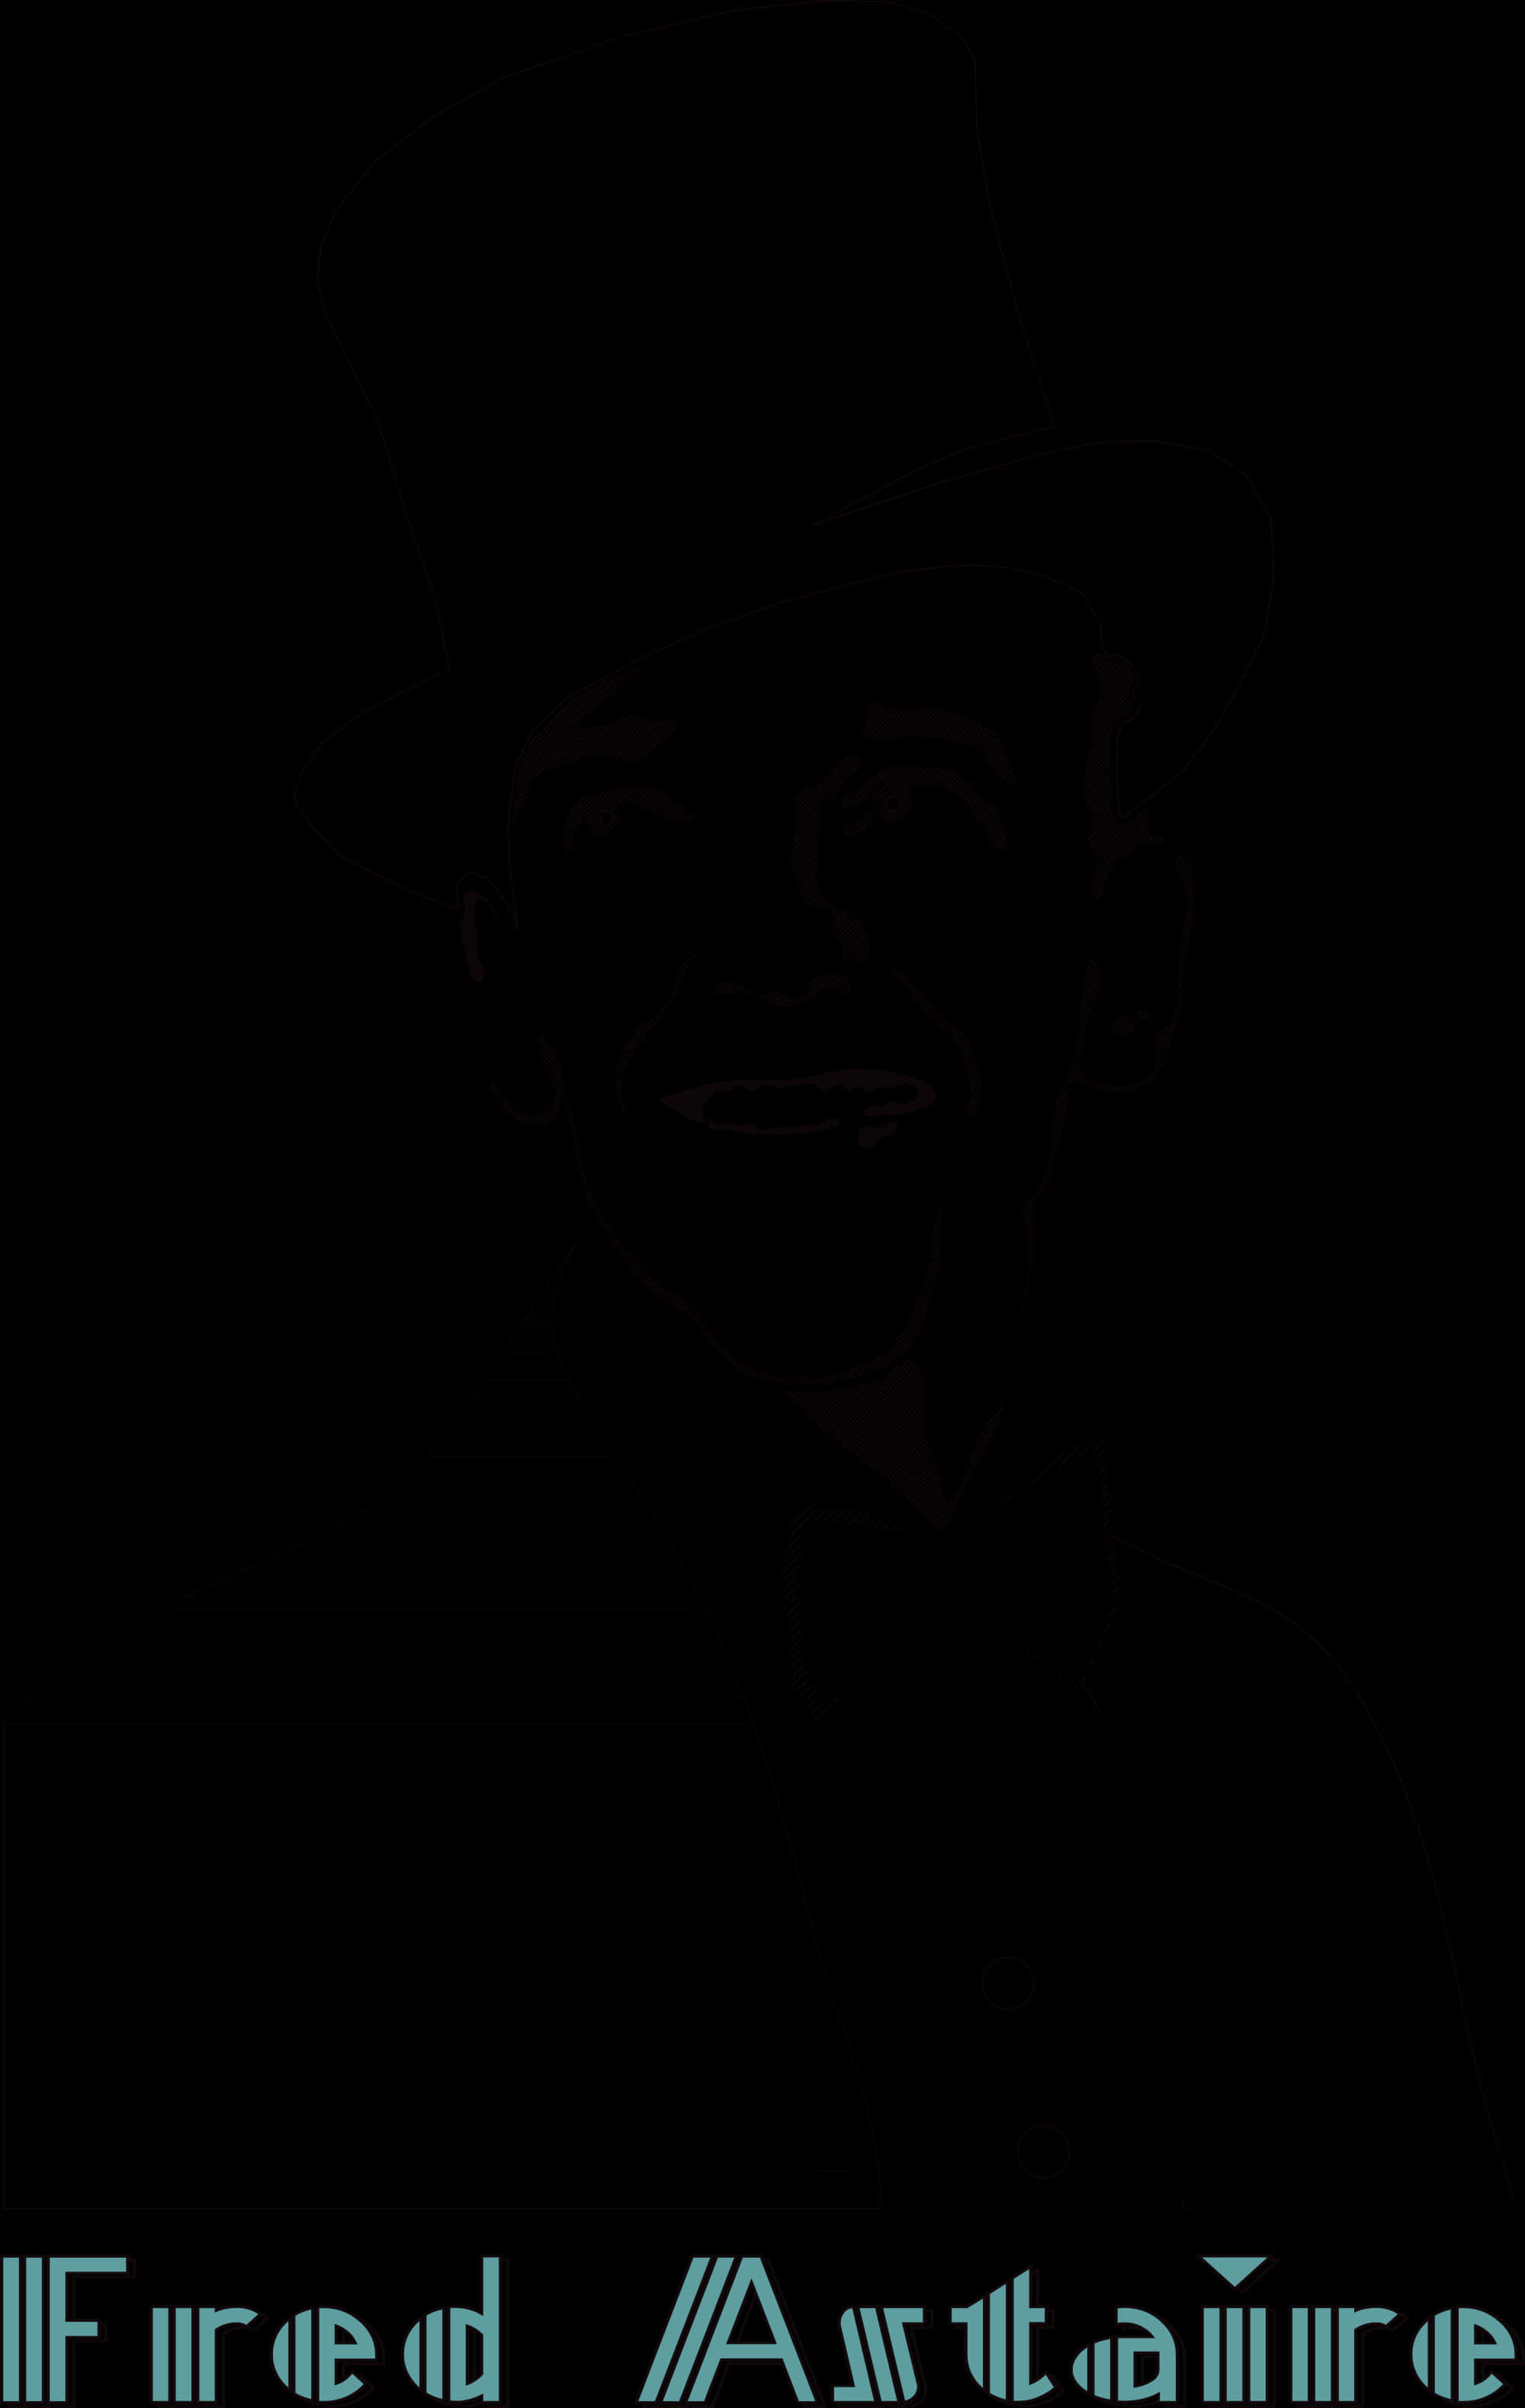 A Silhouette Of A Man In A Hat